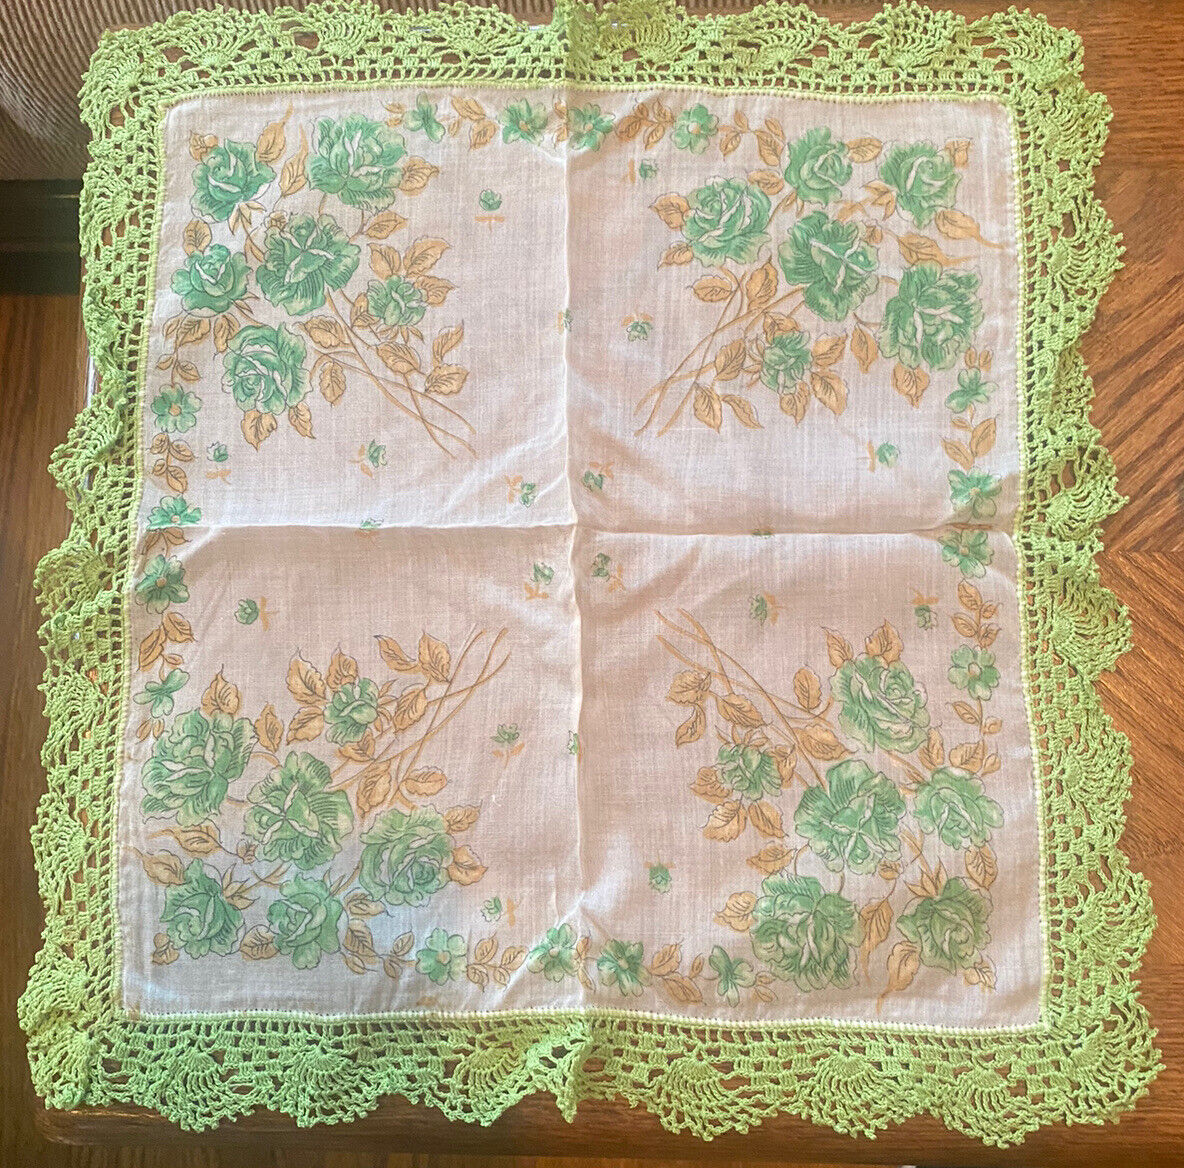 Vintage lankier green floral with lace 14x14